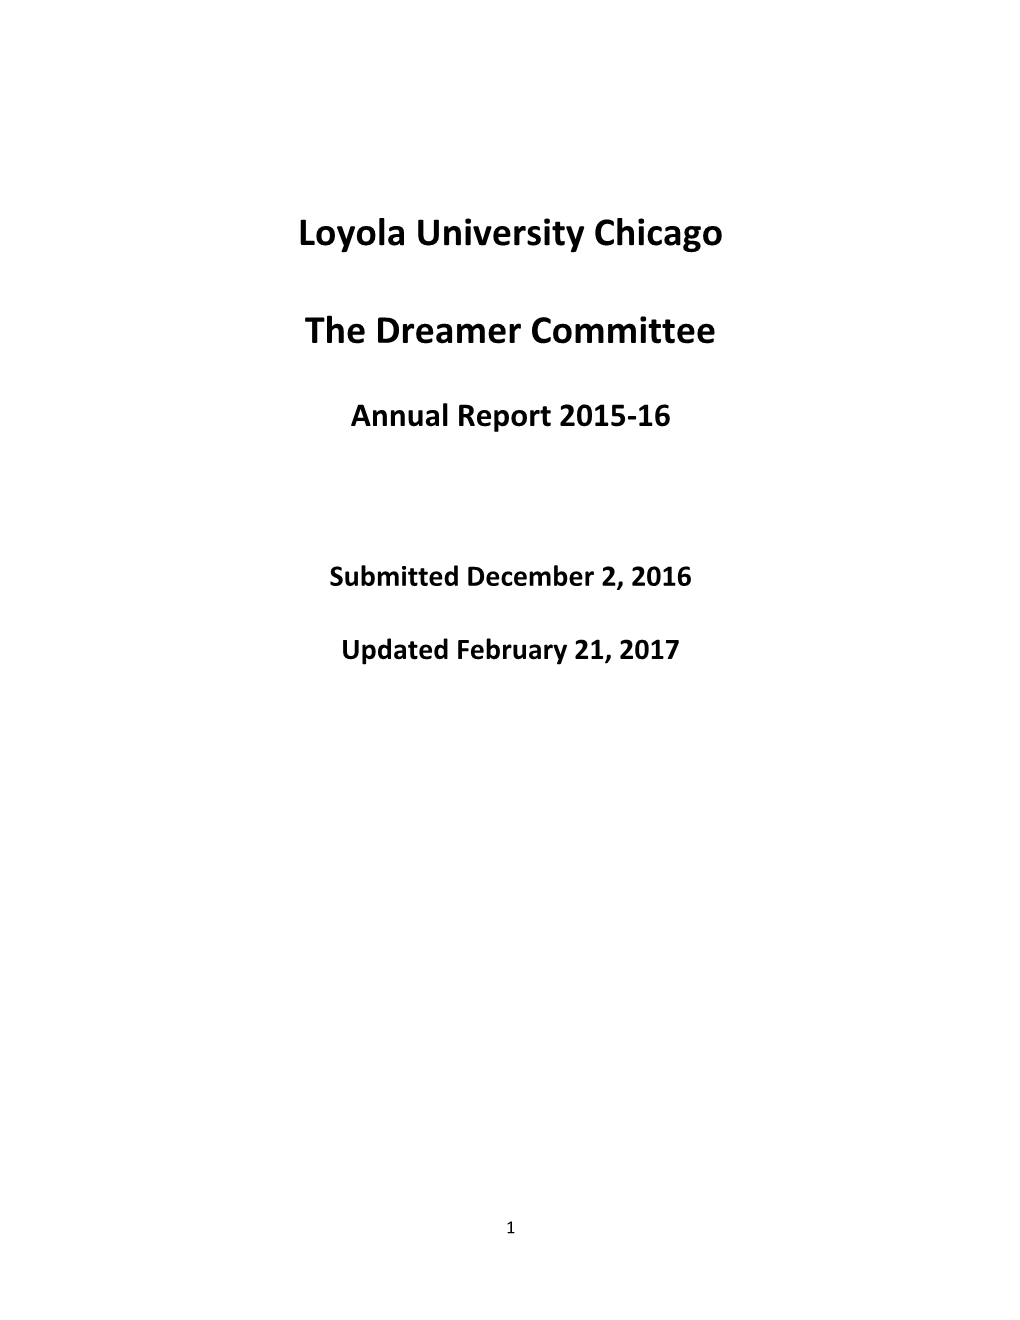 Dreamer Committee Report and 3 Recommendations (10)